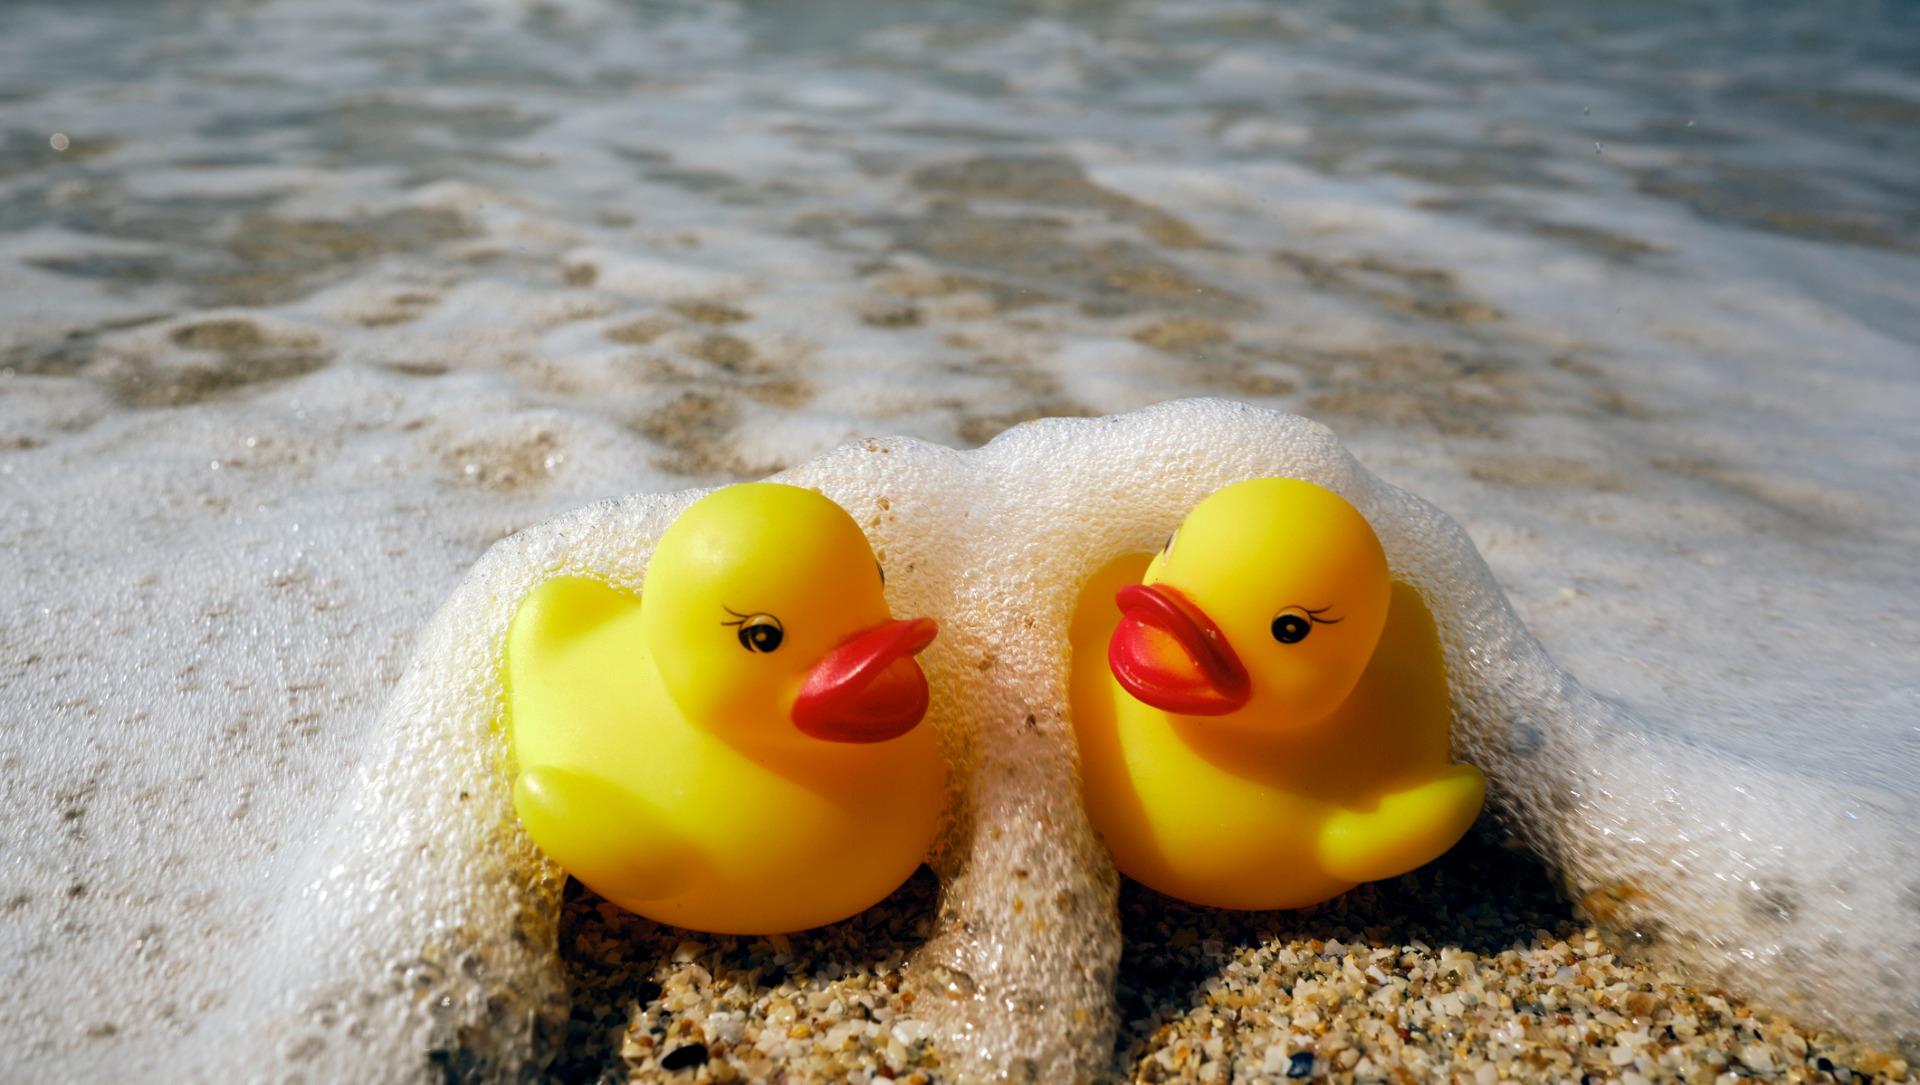 Two rubber ducks caught in a wave at the shoreline at the beach - Cashrewards.jpg